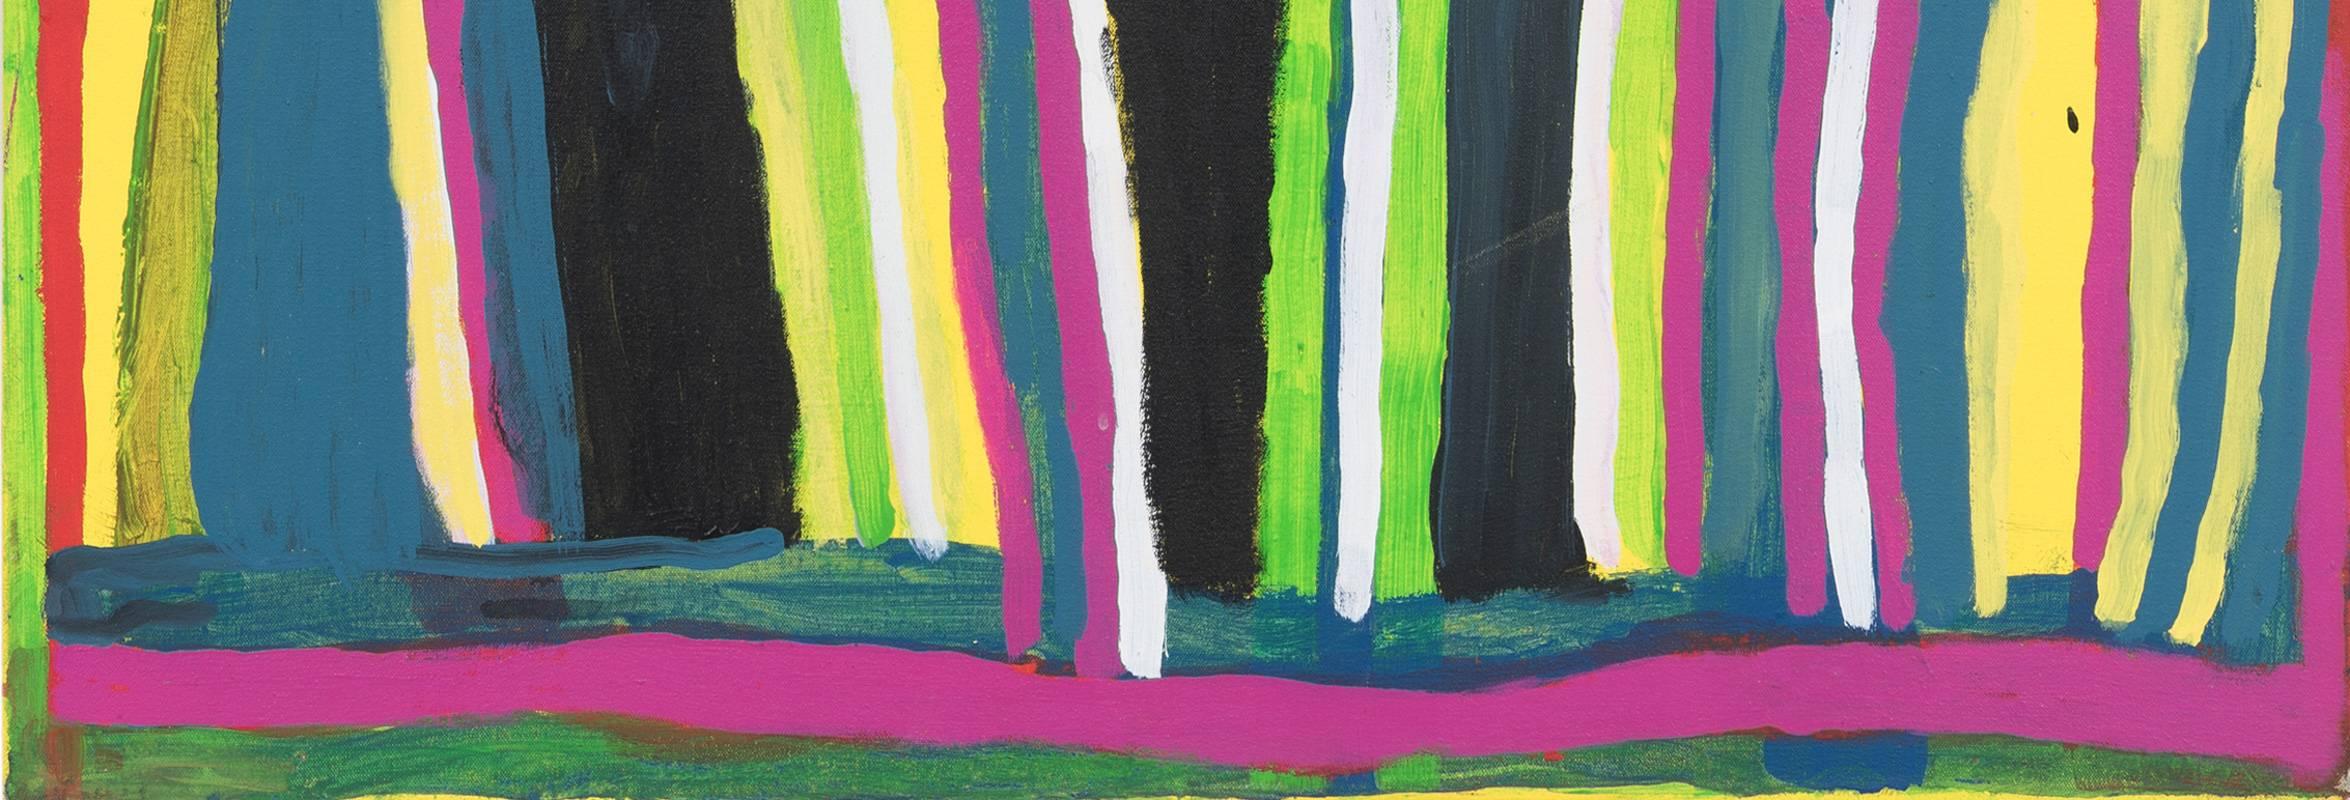 Painted Bright Striped Painting by Australian Aboriginal Artist Dolly Snell For Sale